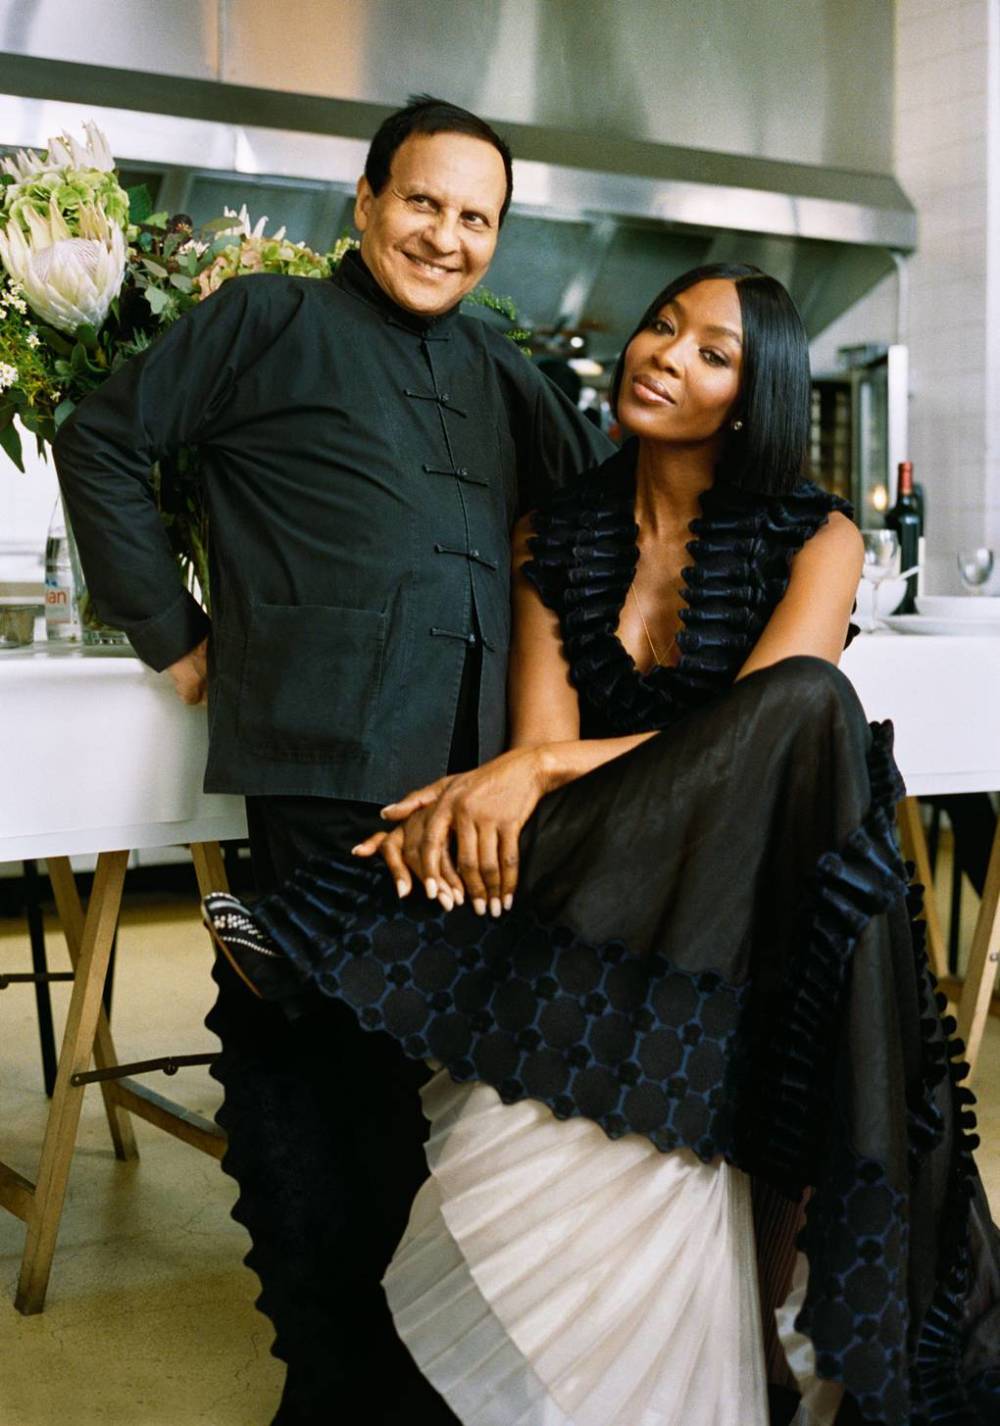  Azzedine and Naomi Campbell, At Dinner 